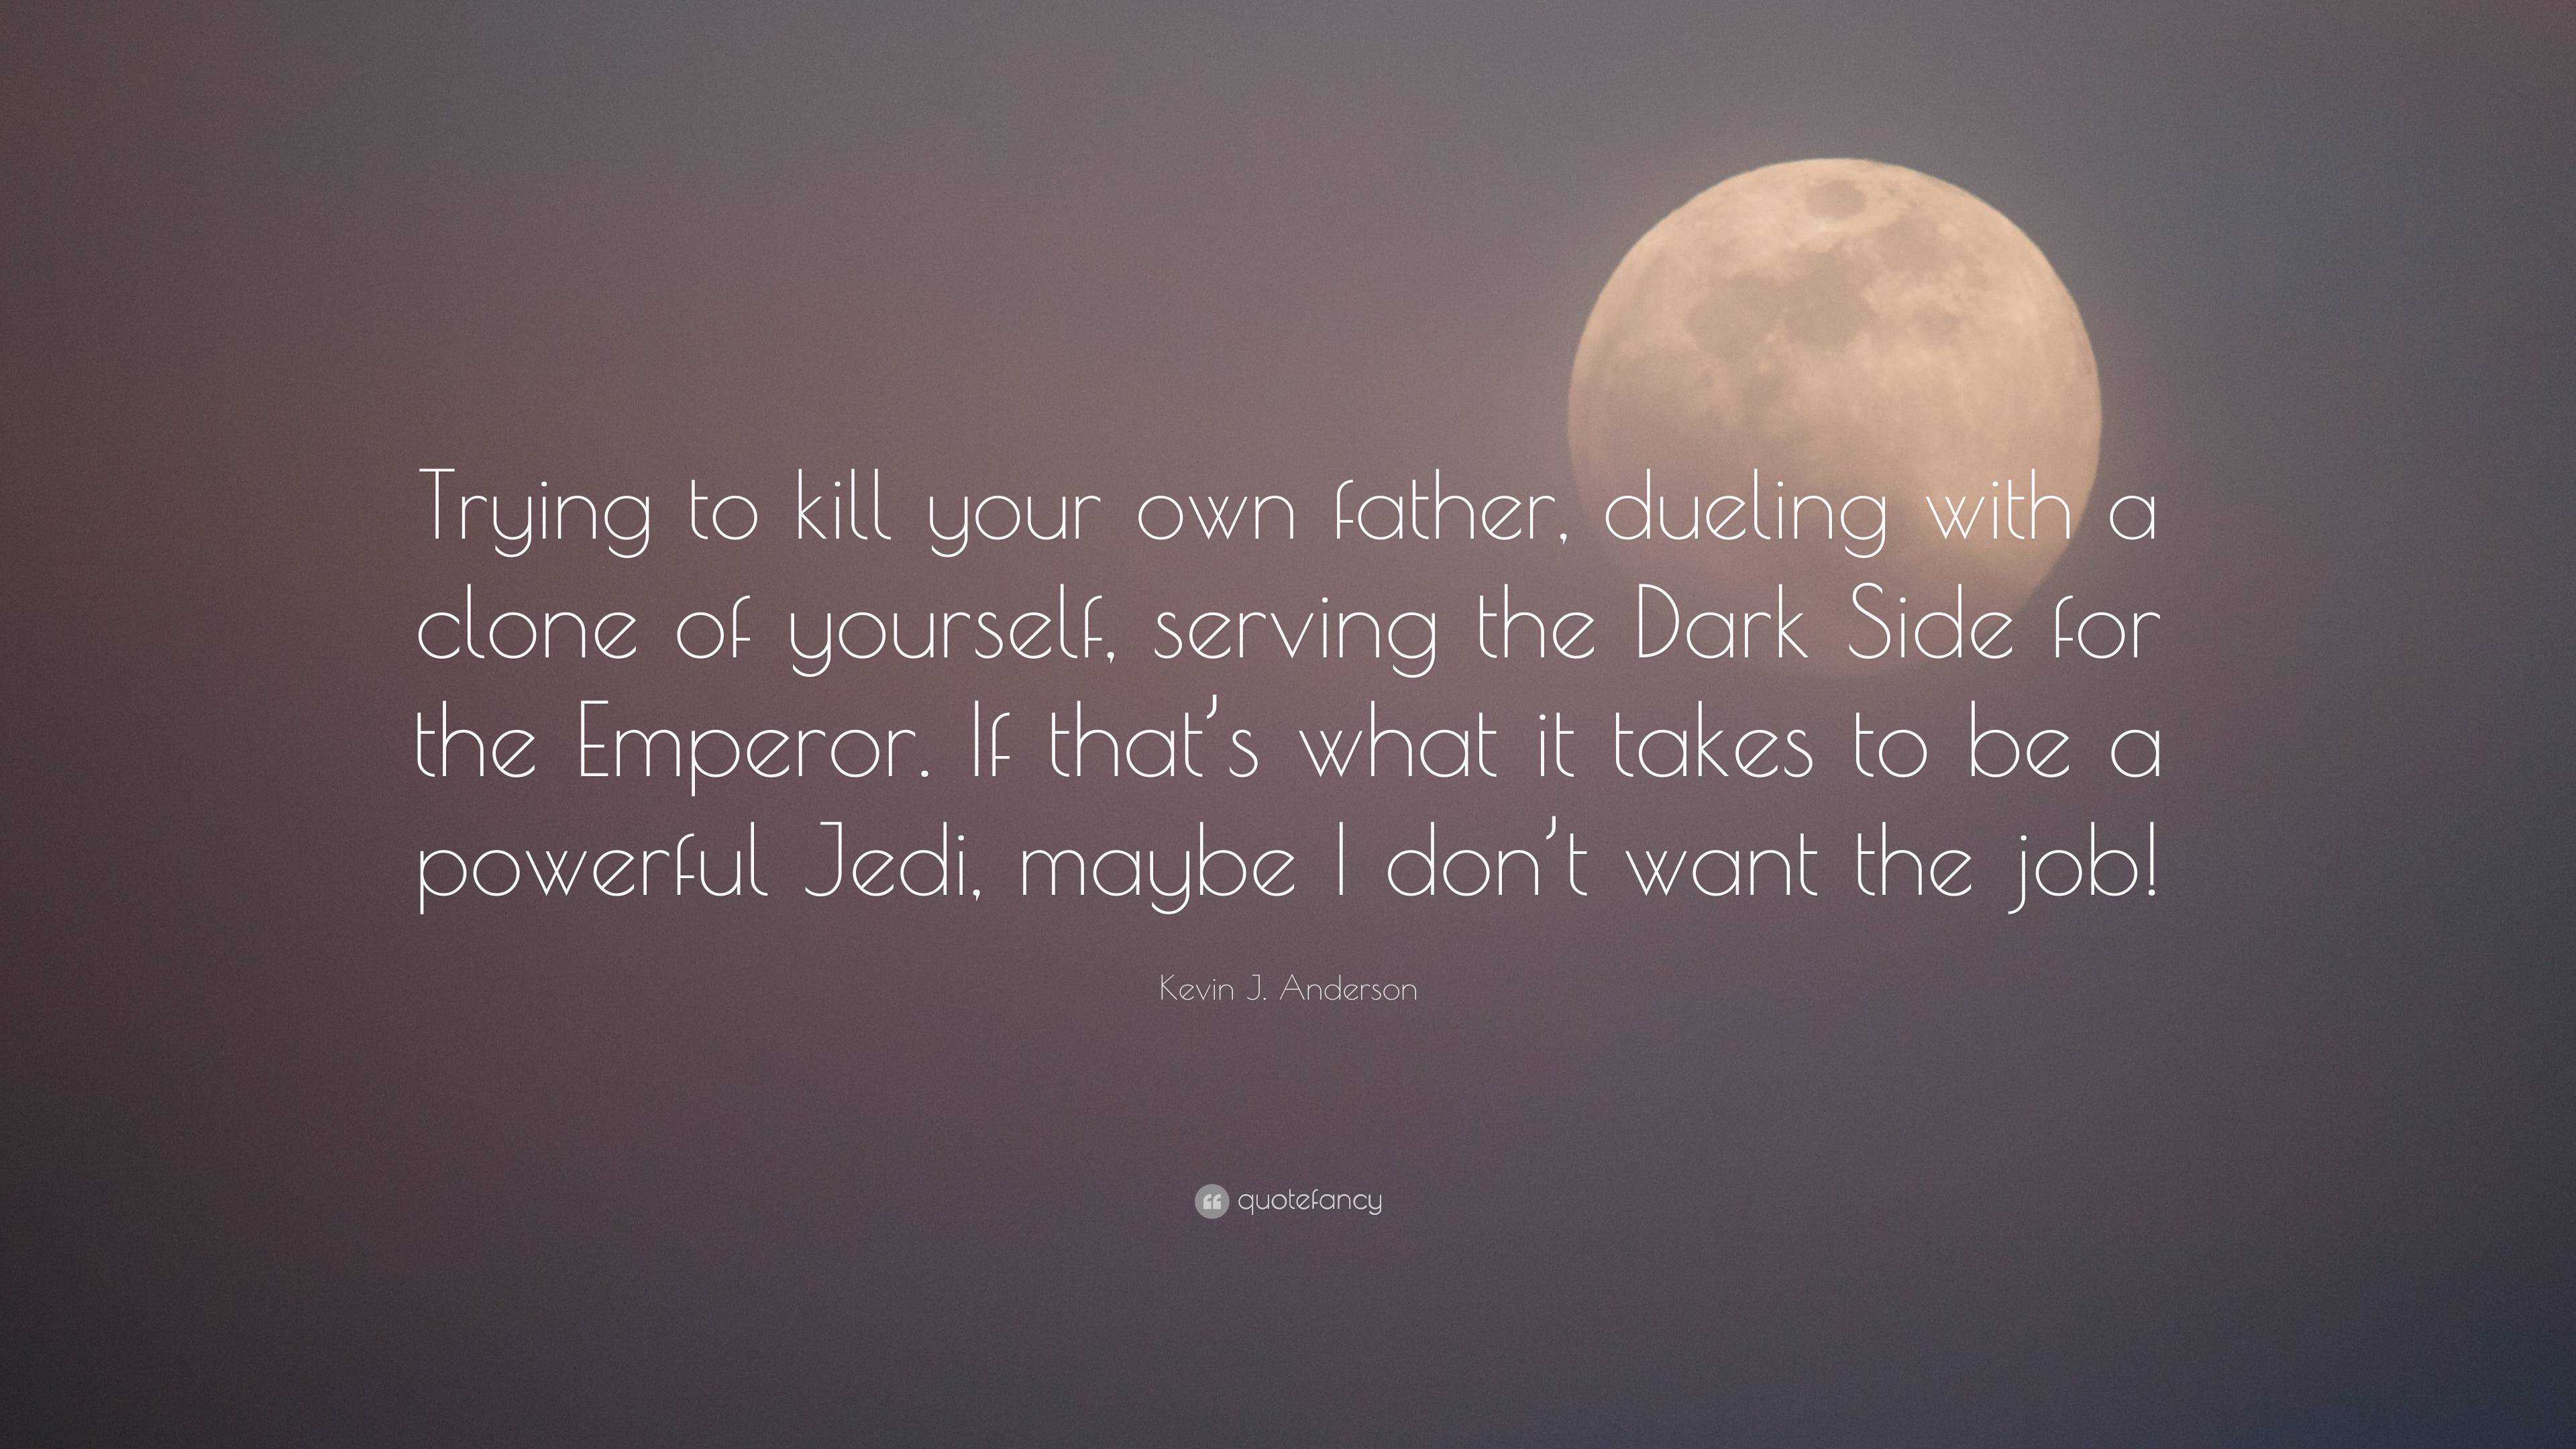 Kevin J. Anderson Quote: “Trying to kill your own father, dueling with ...